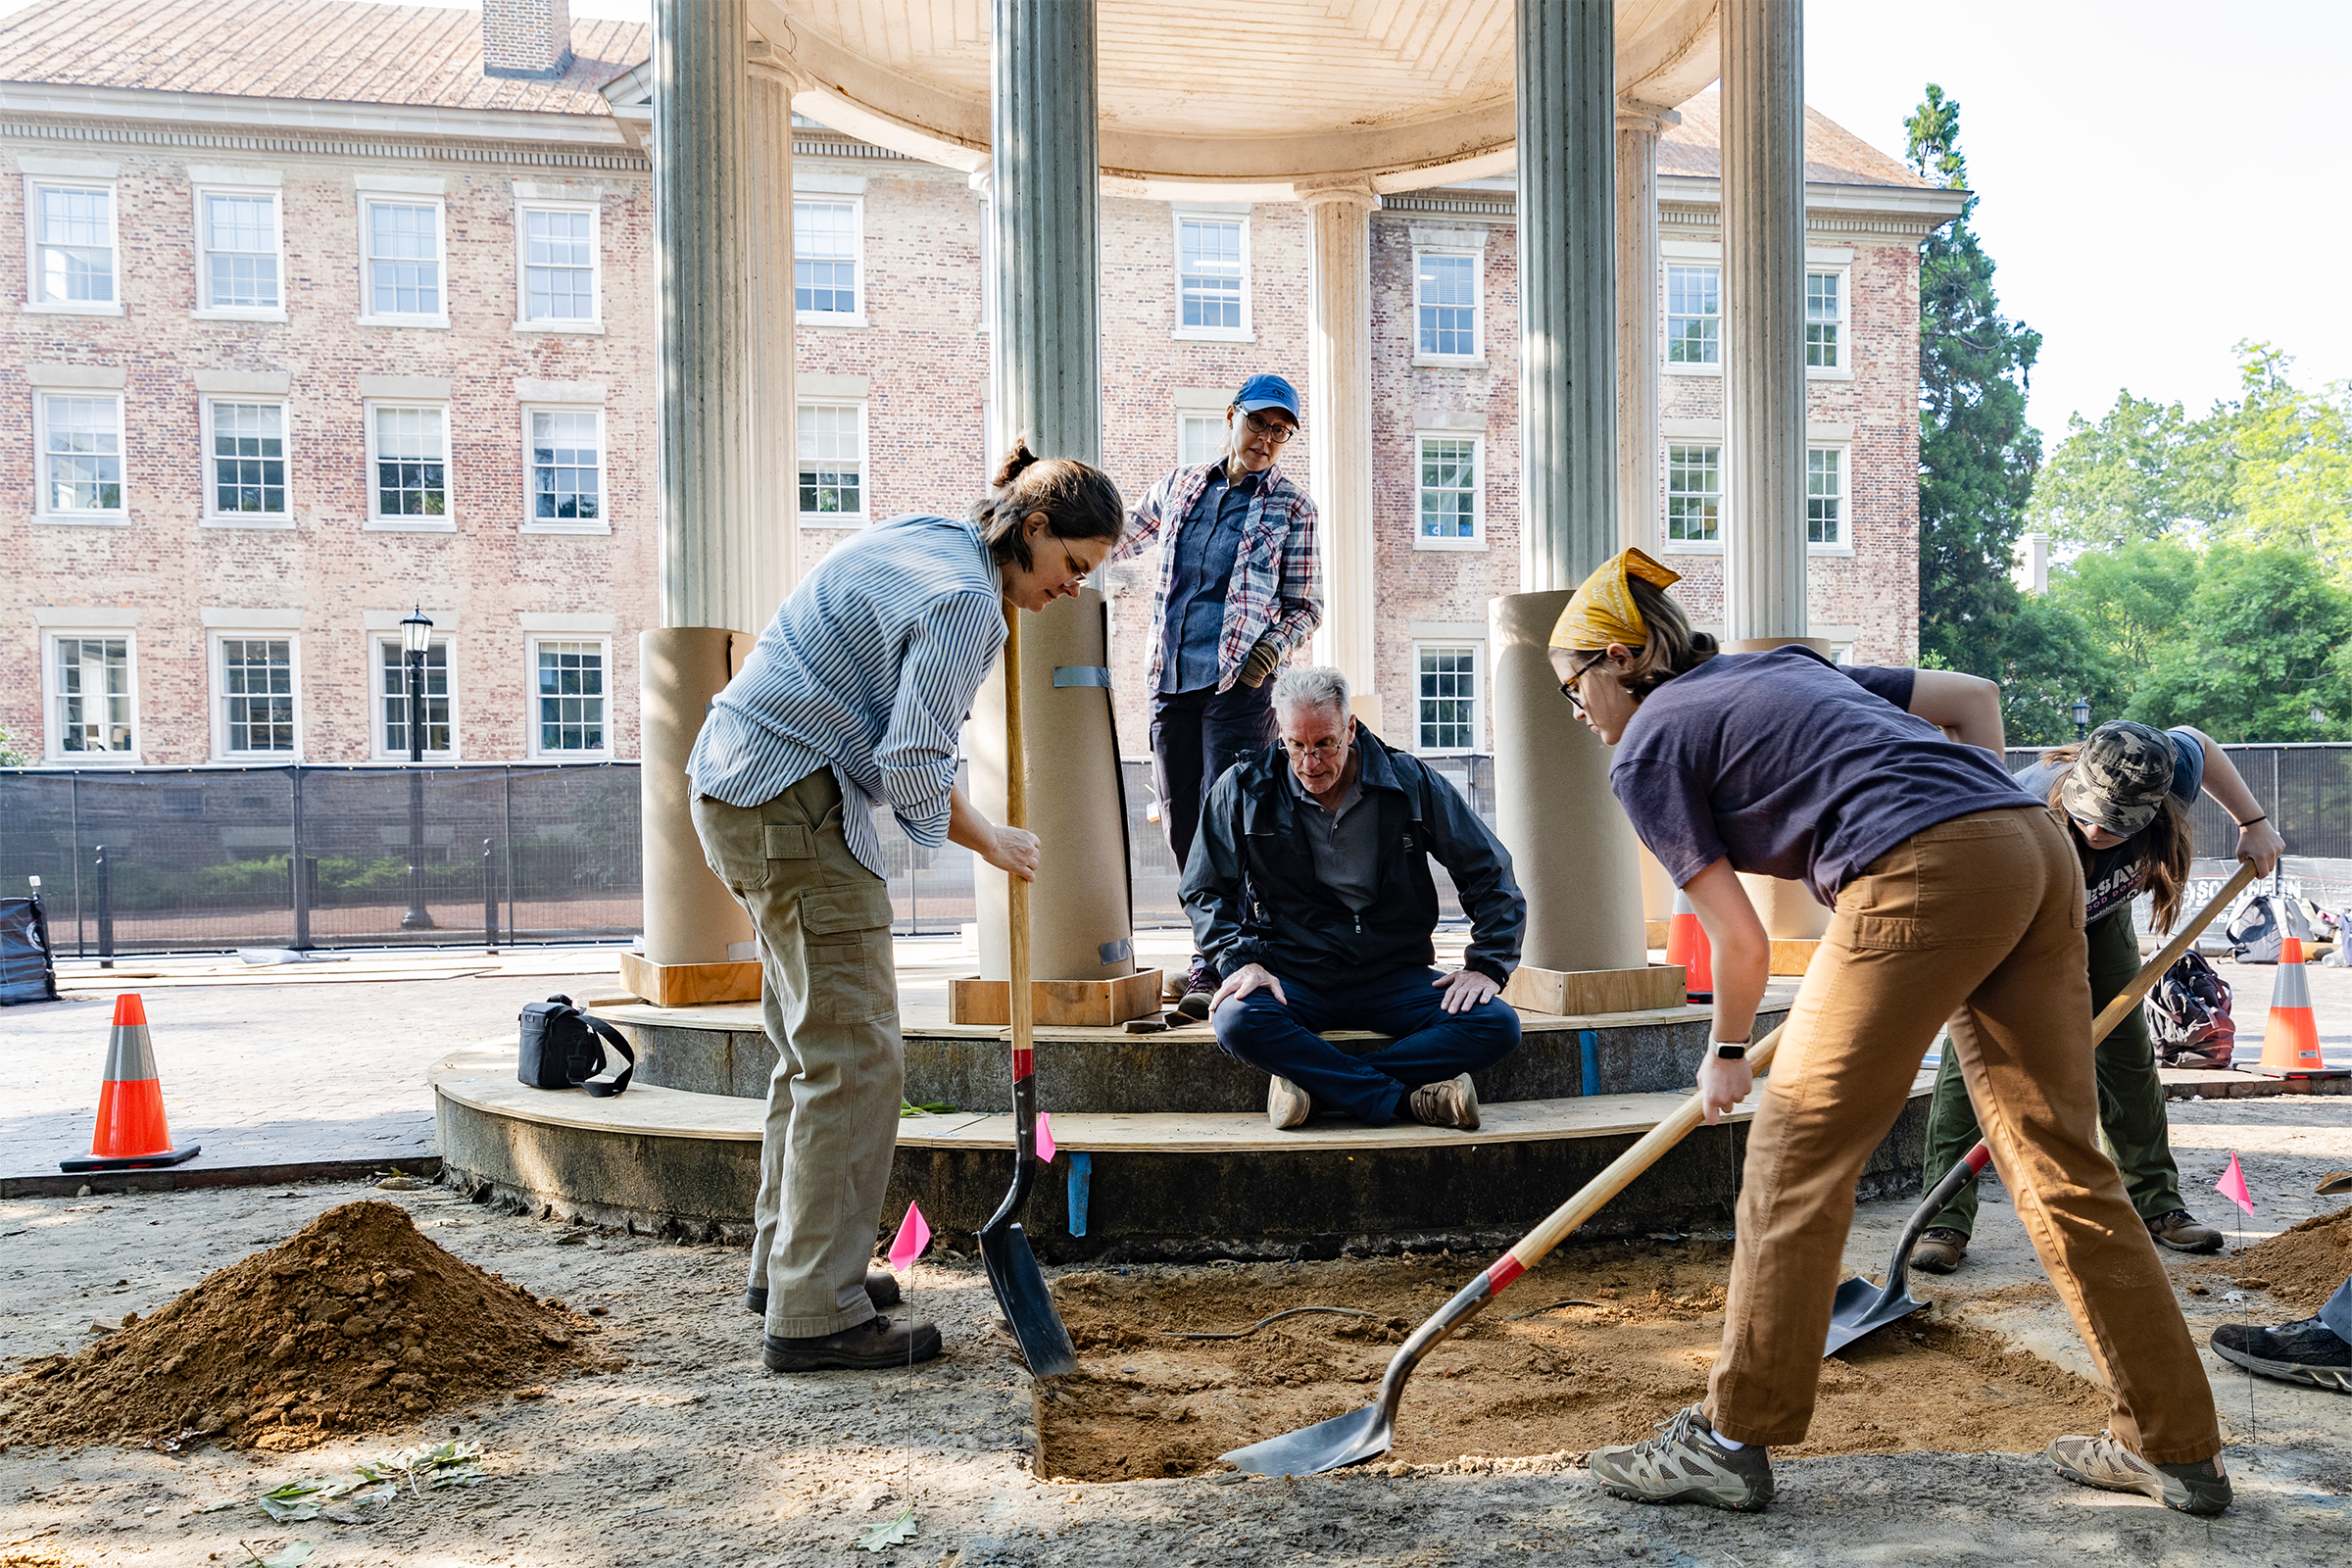 Two students using shovels to dig into the ground next to a well. Two onlookers are in the background.